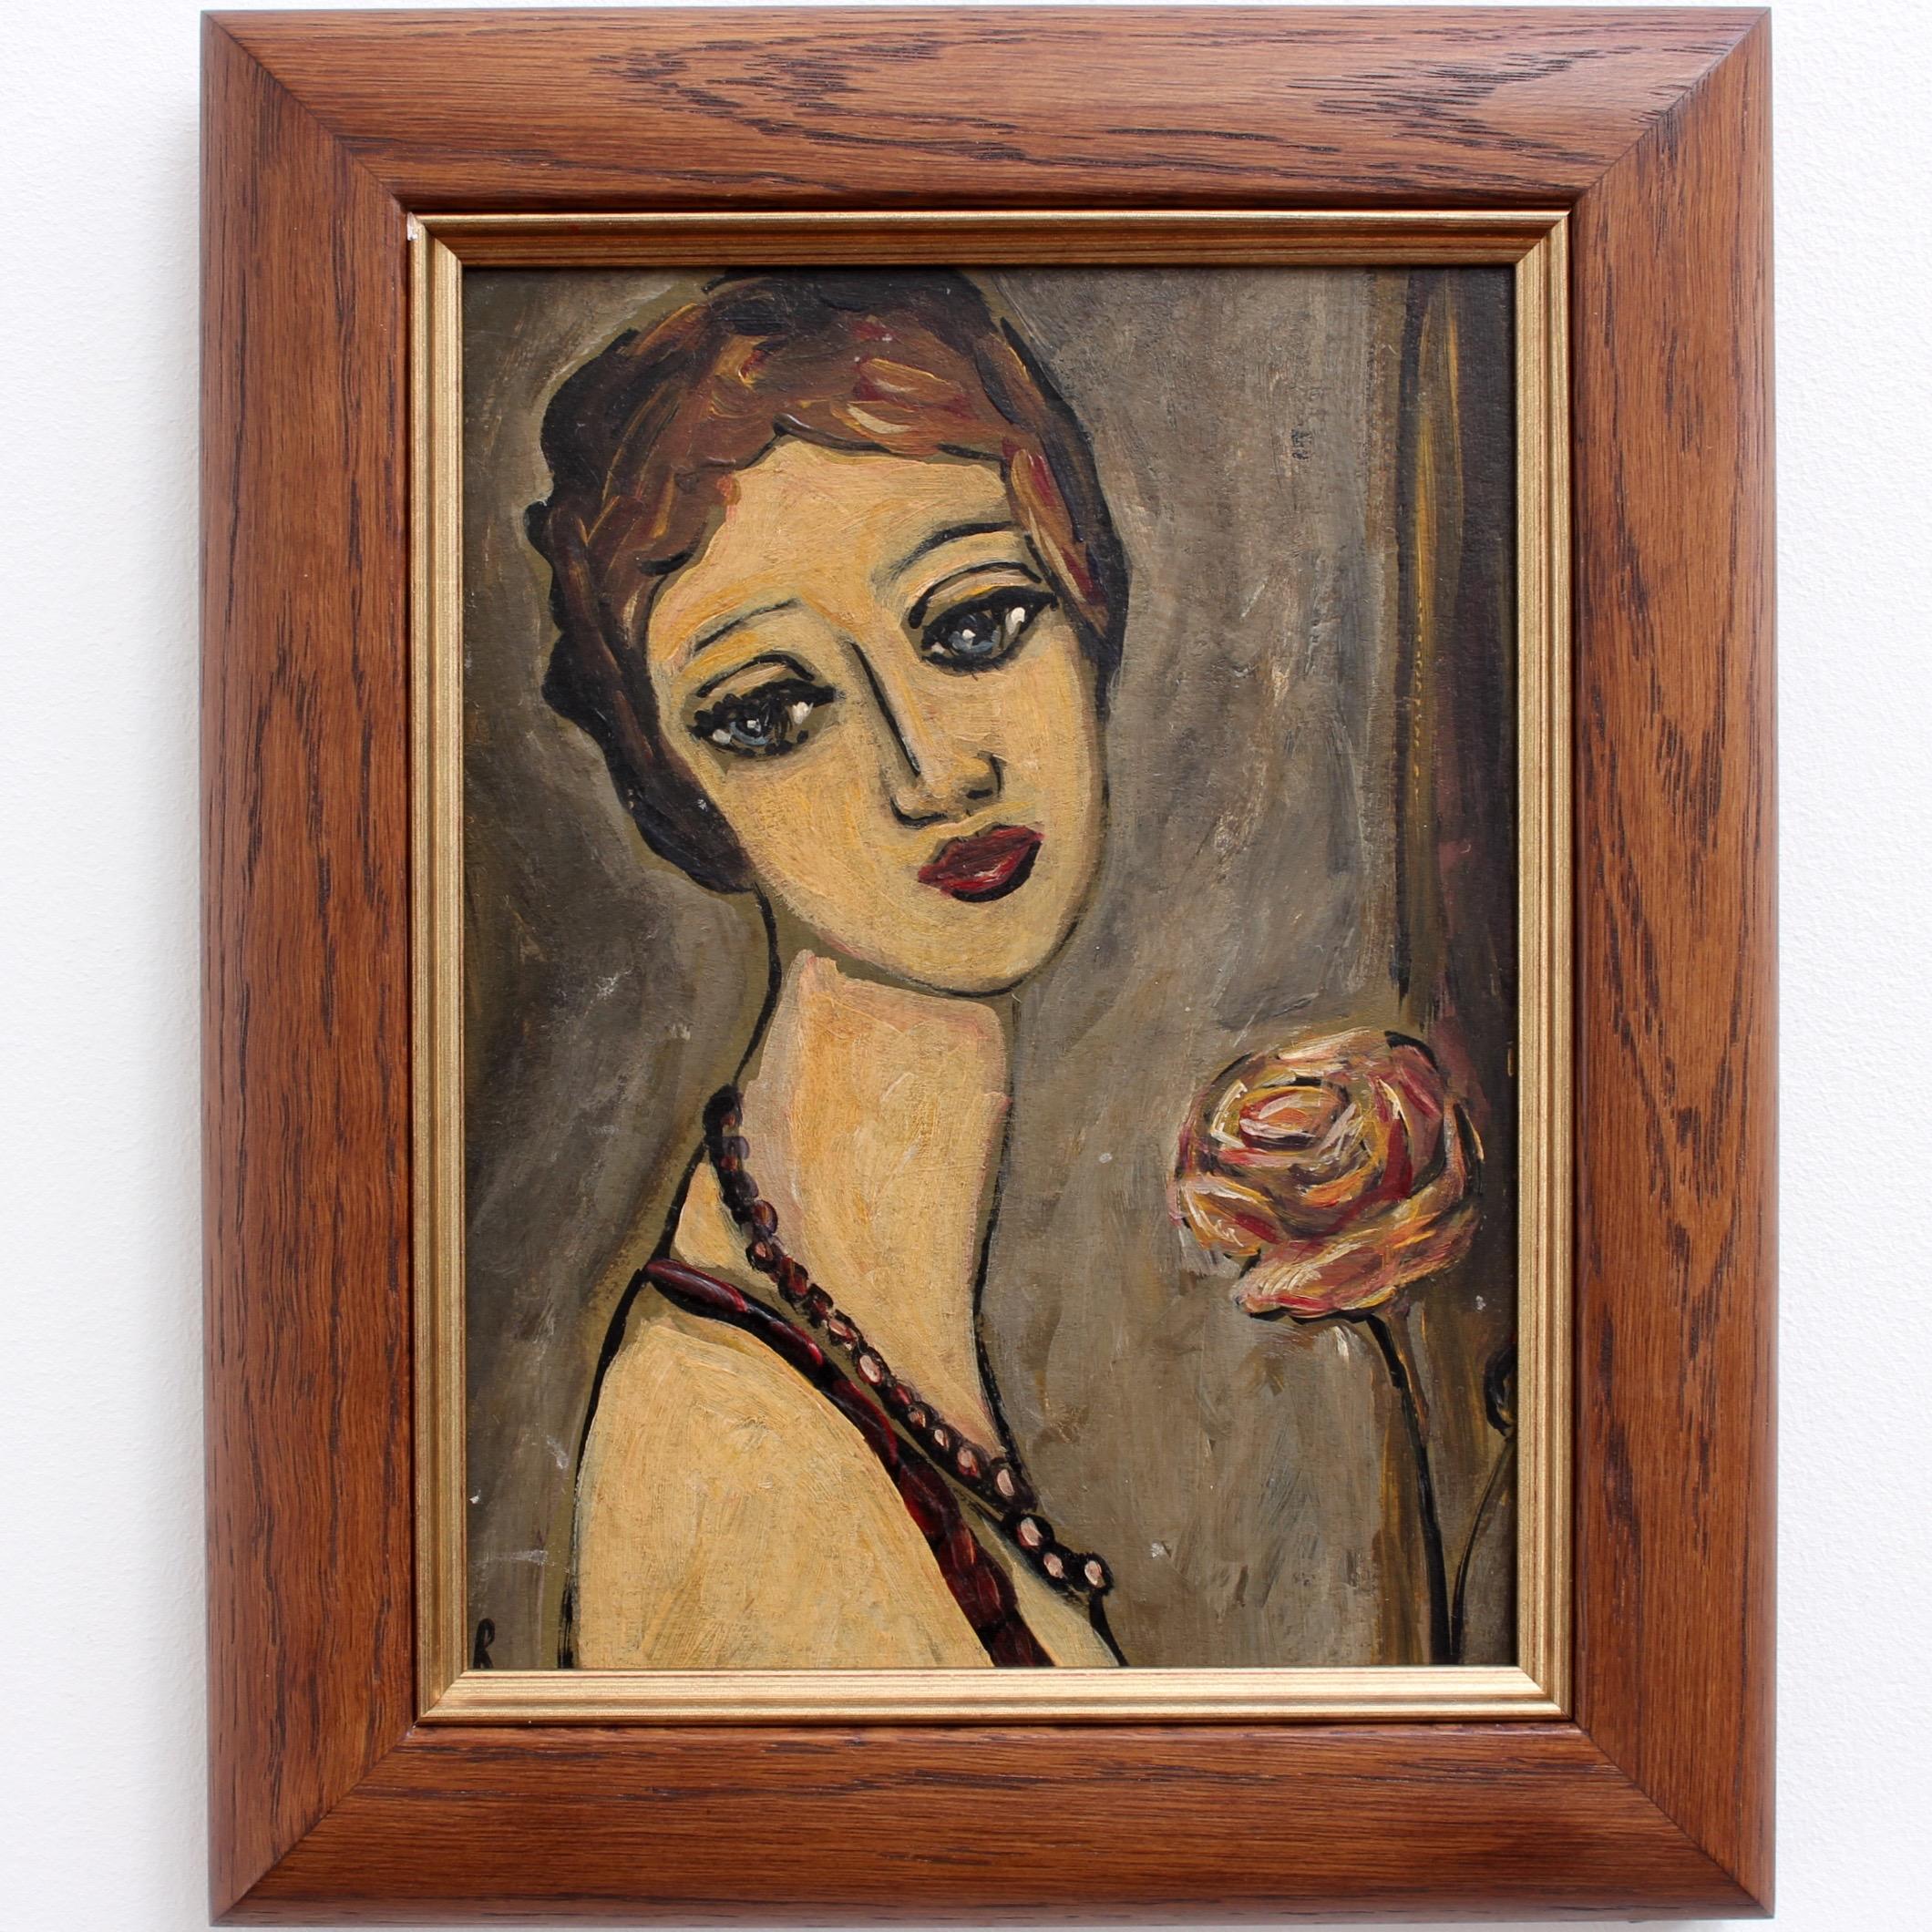 'Pensive Woman with Rose', Mid-Century Portrait Oil Painting (circa 1940s - 50s) - Brown Portrait Painting by Unknown